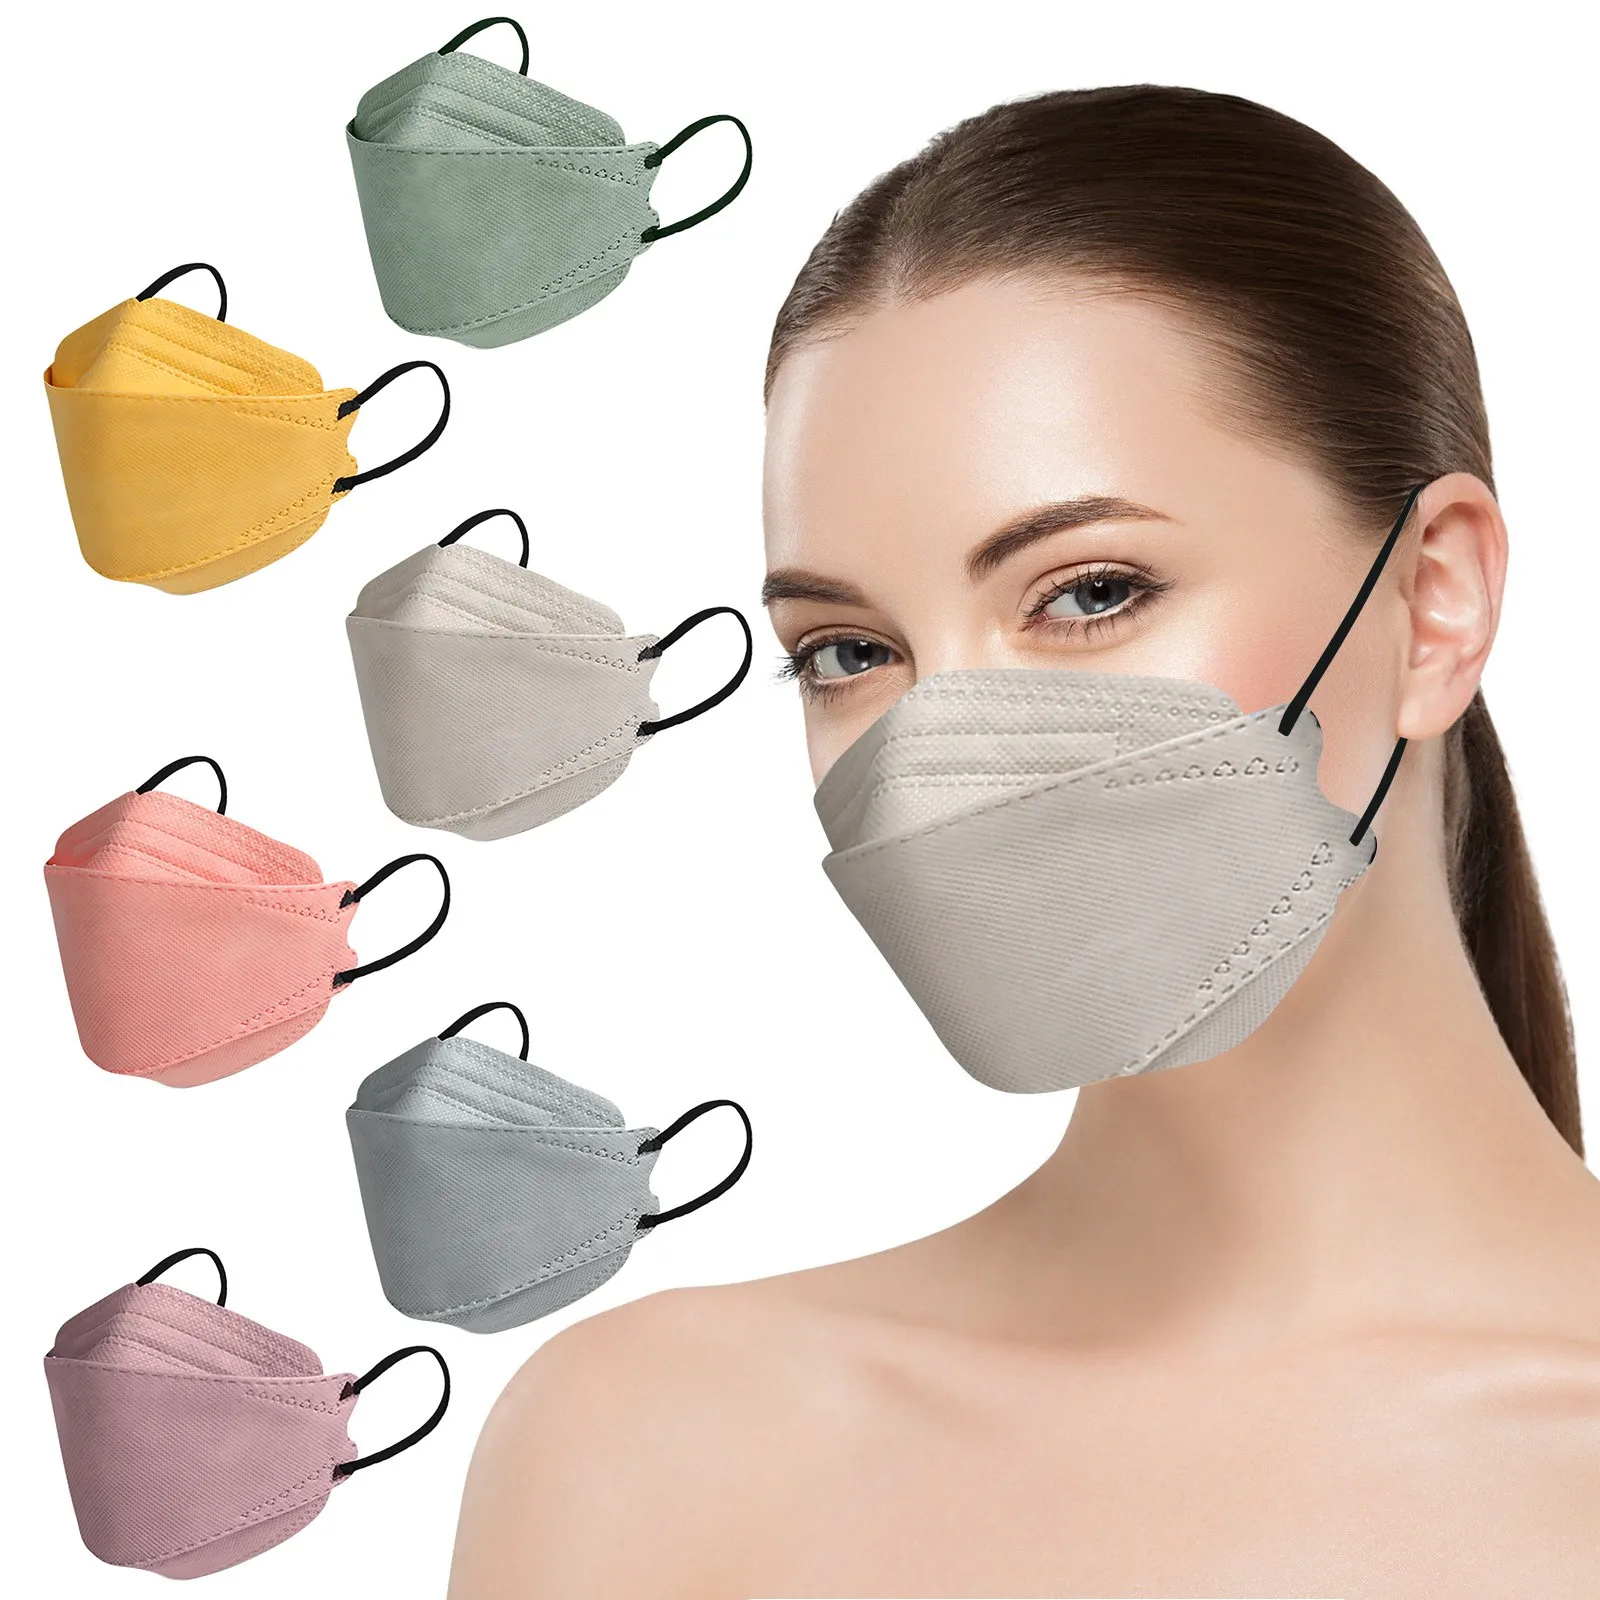 

10PC Face Mask Fish Type 3d 4-ply Solid Color Disposable Masks Navidad Adult Covers Fashion Mouths Masque Mouth Cover Cubrebocas